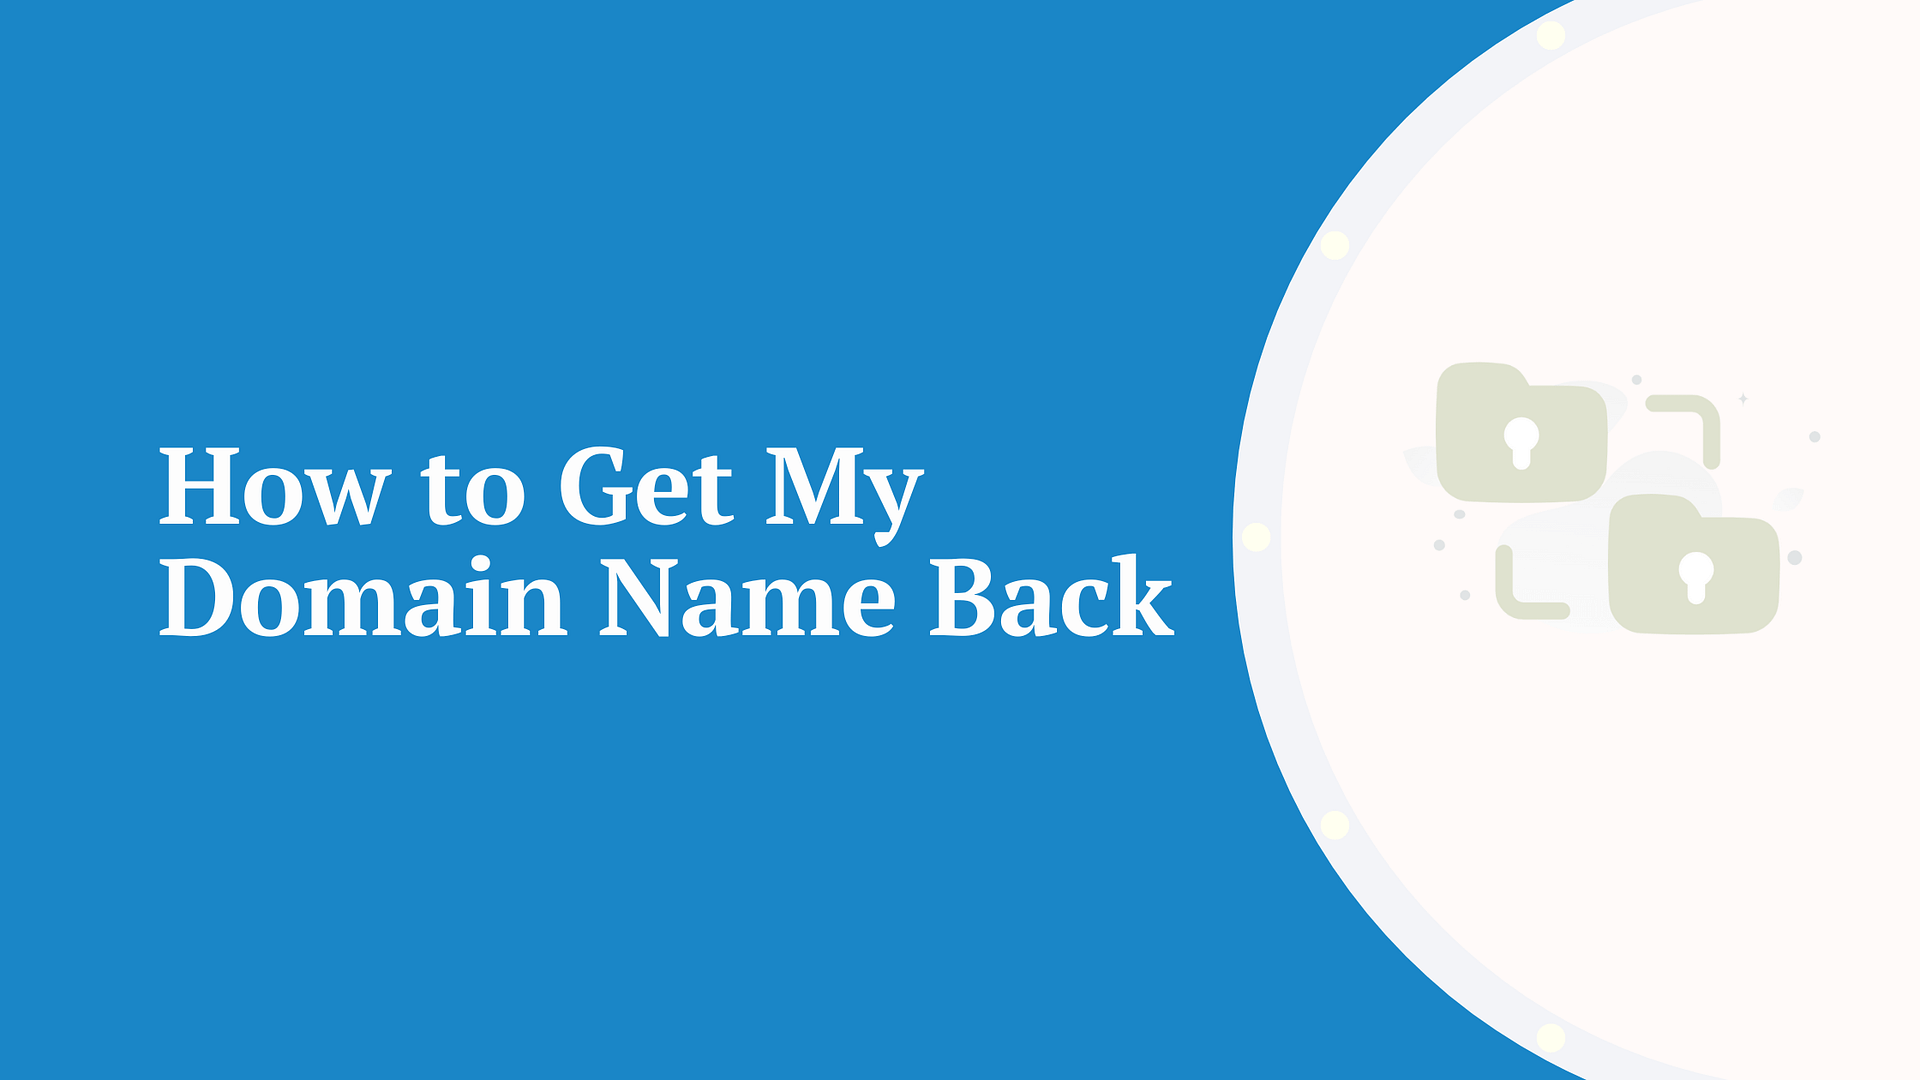 How to get my domain name back.